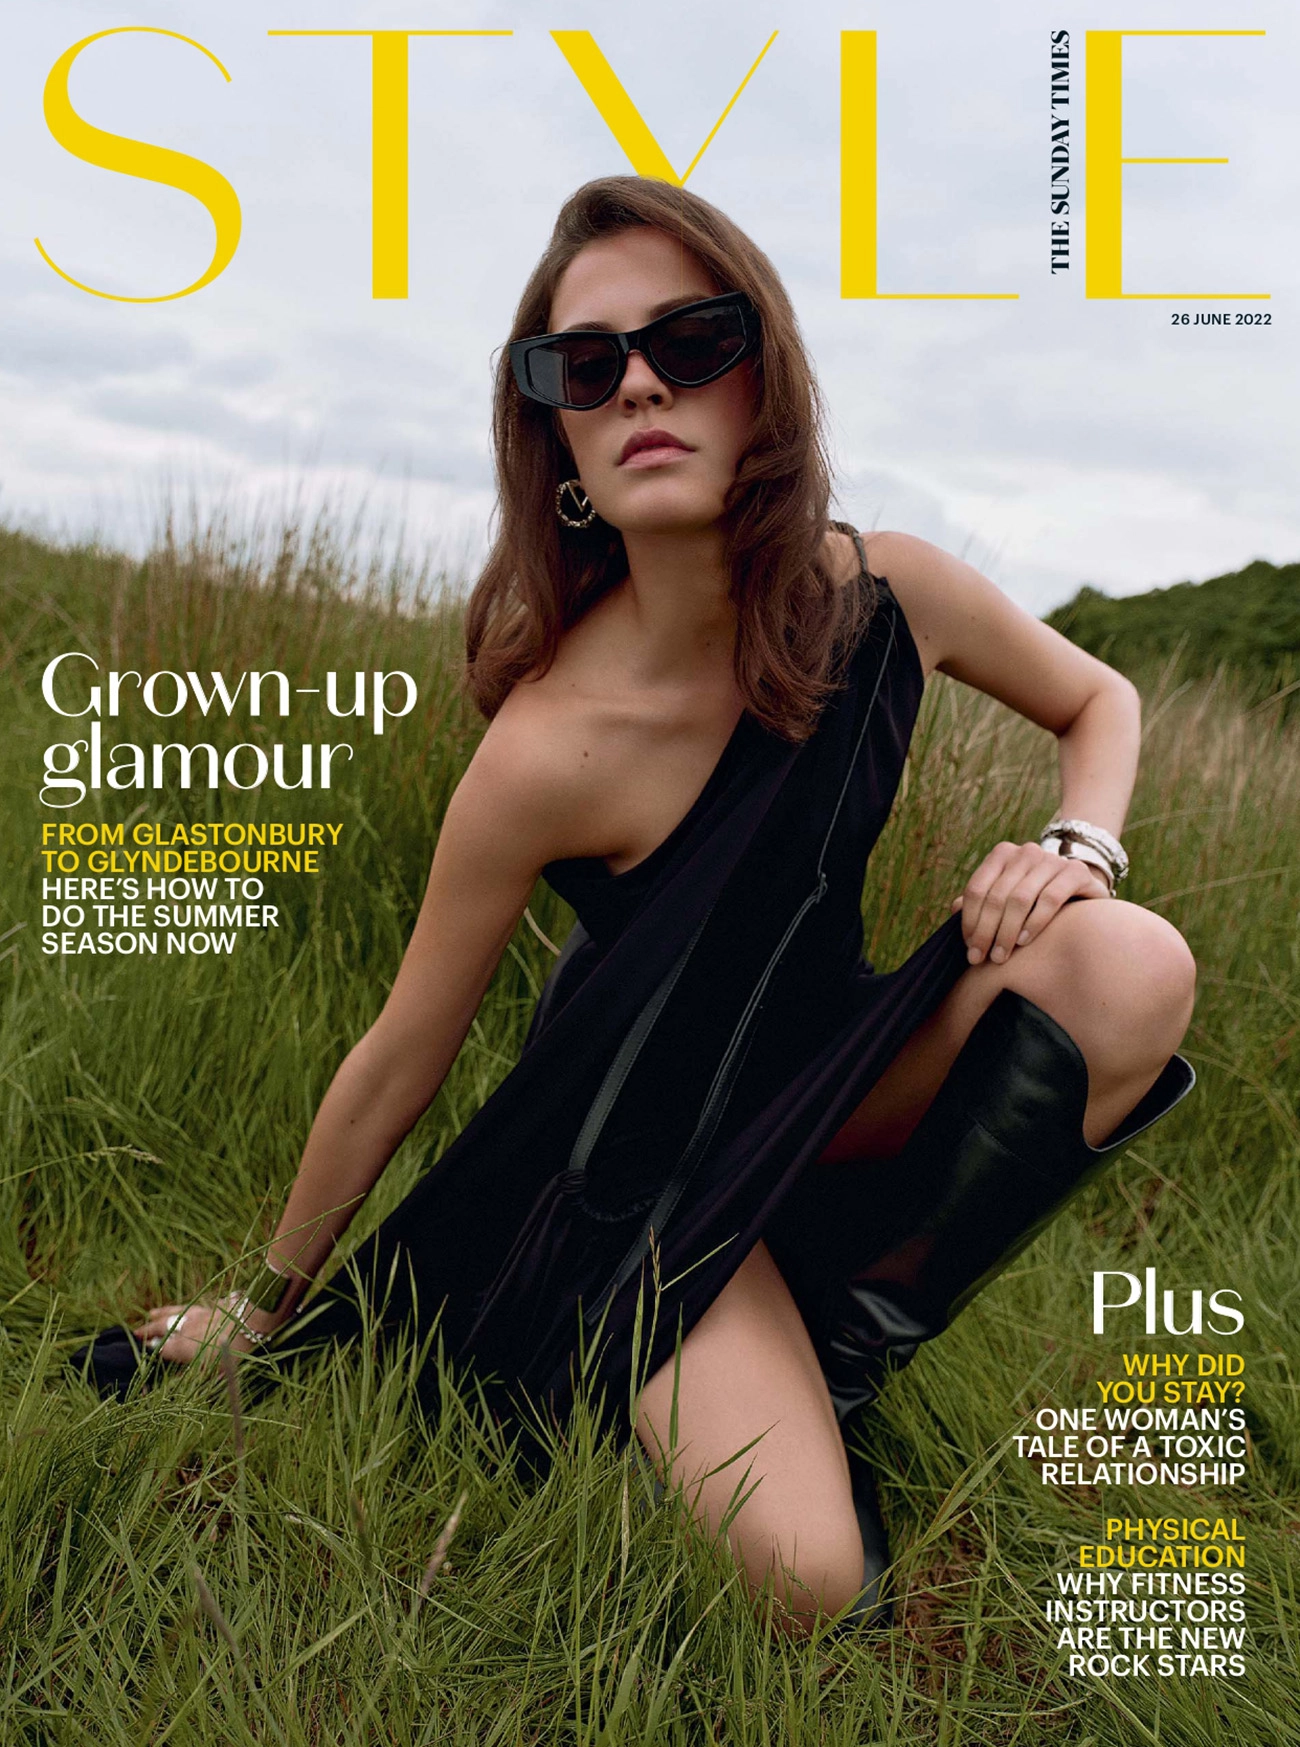 Denise Ascuet covers The Sunday Times Style June 26th, 2022 by Morgane Lay & Jonny Cochrane